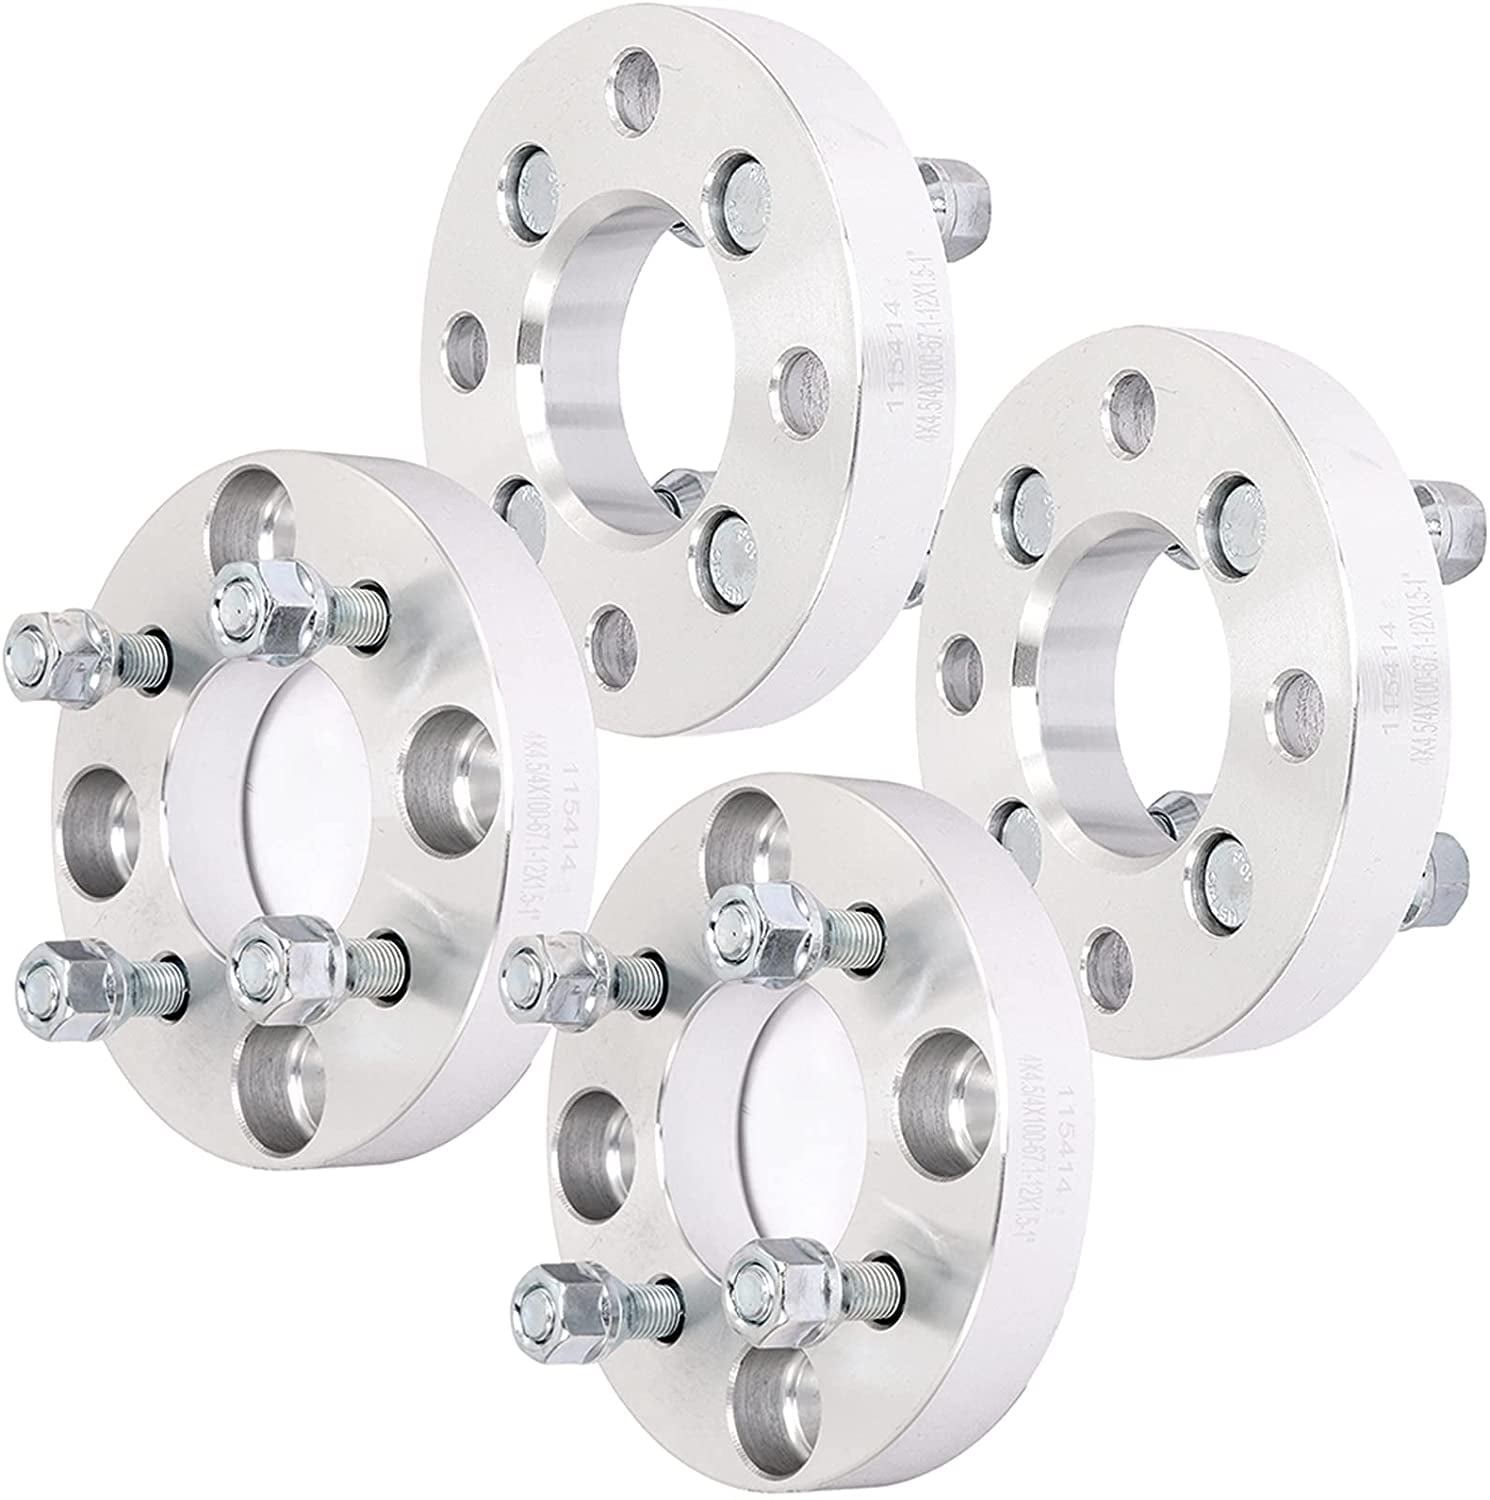 ECCPP Replacement for 1.5 inch Wheel Spacers 5 Lug 5x5 to 5x5/5x127mm to 5x127mm 1.5 38mm 87.1mm hub Wheel Spacers Fits for 1996 to 1999 Chevy GMC C1500 Suburban Yukon Tahoe with 14x1.5 Studs 